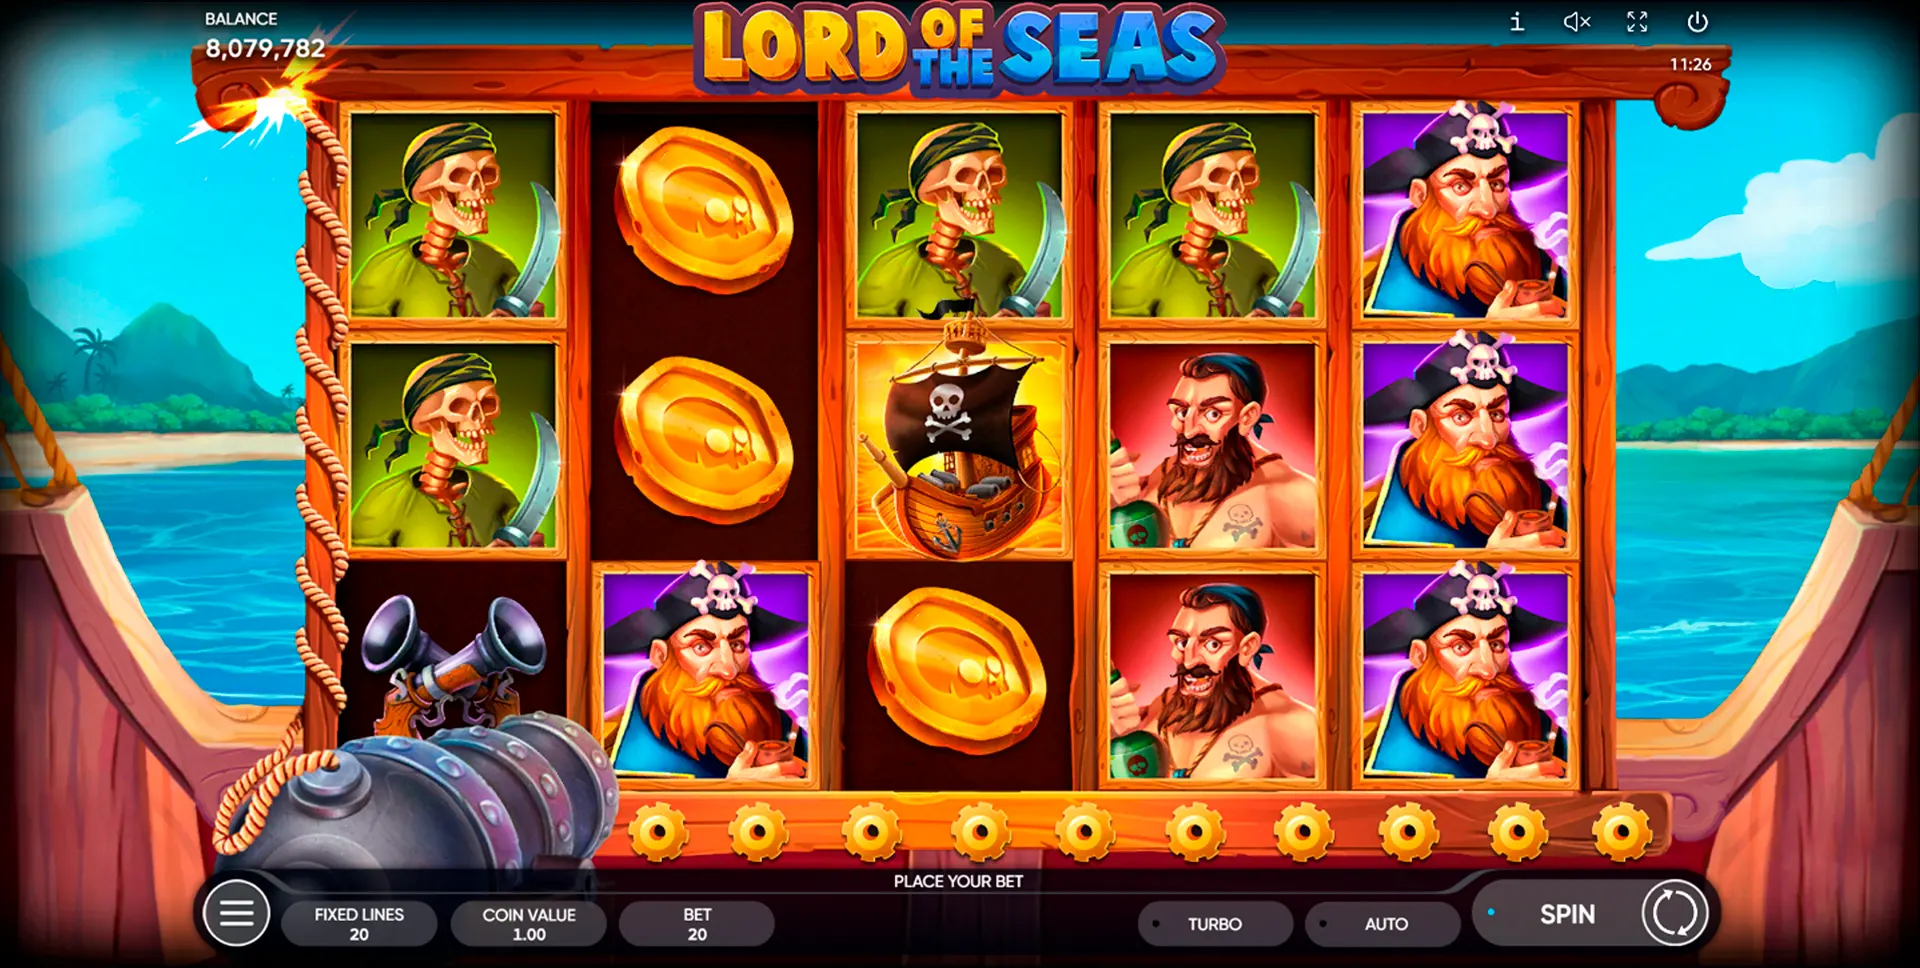 Lord of the Seas Theme